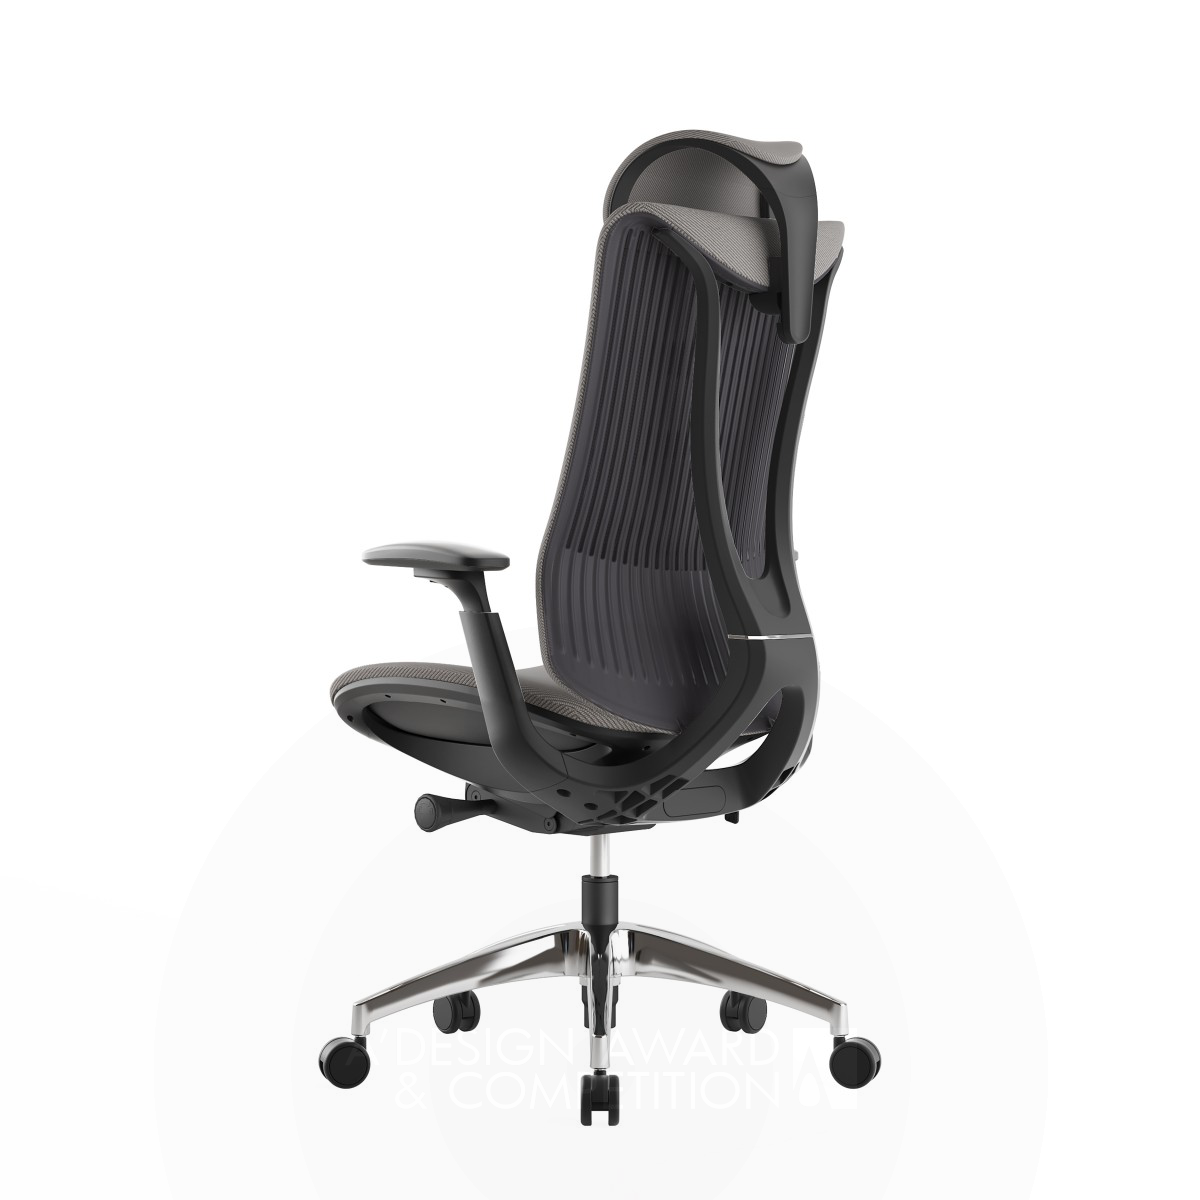 Icloud Office Chair by Koho R and D Team Silver Office Furniture Design Award Winner 2023 